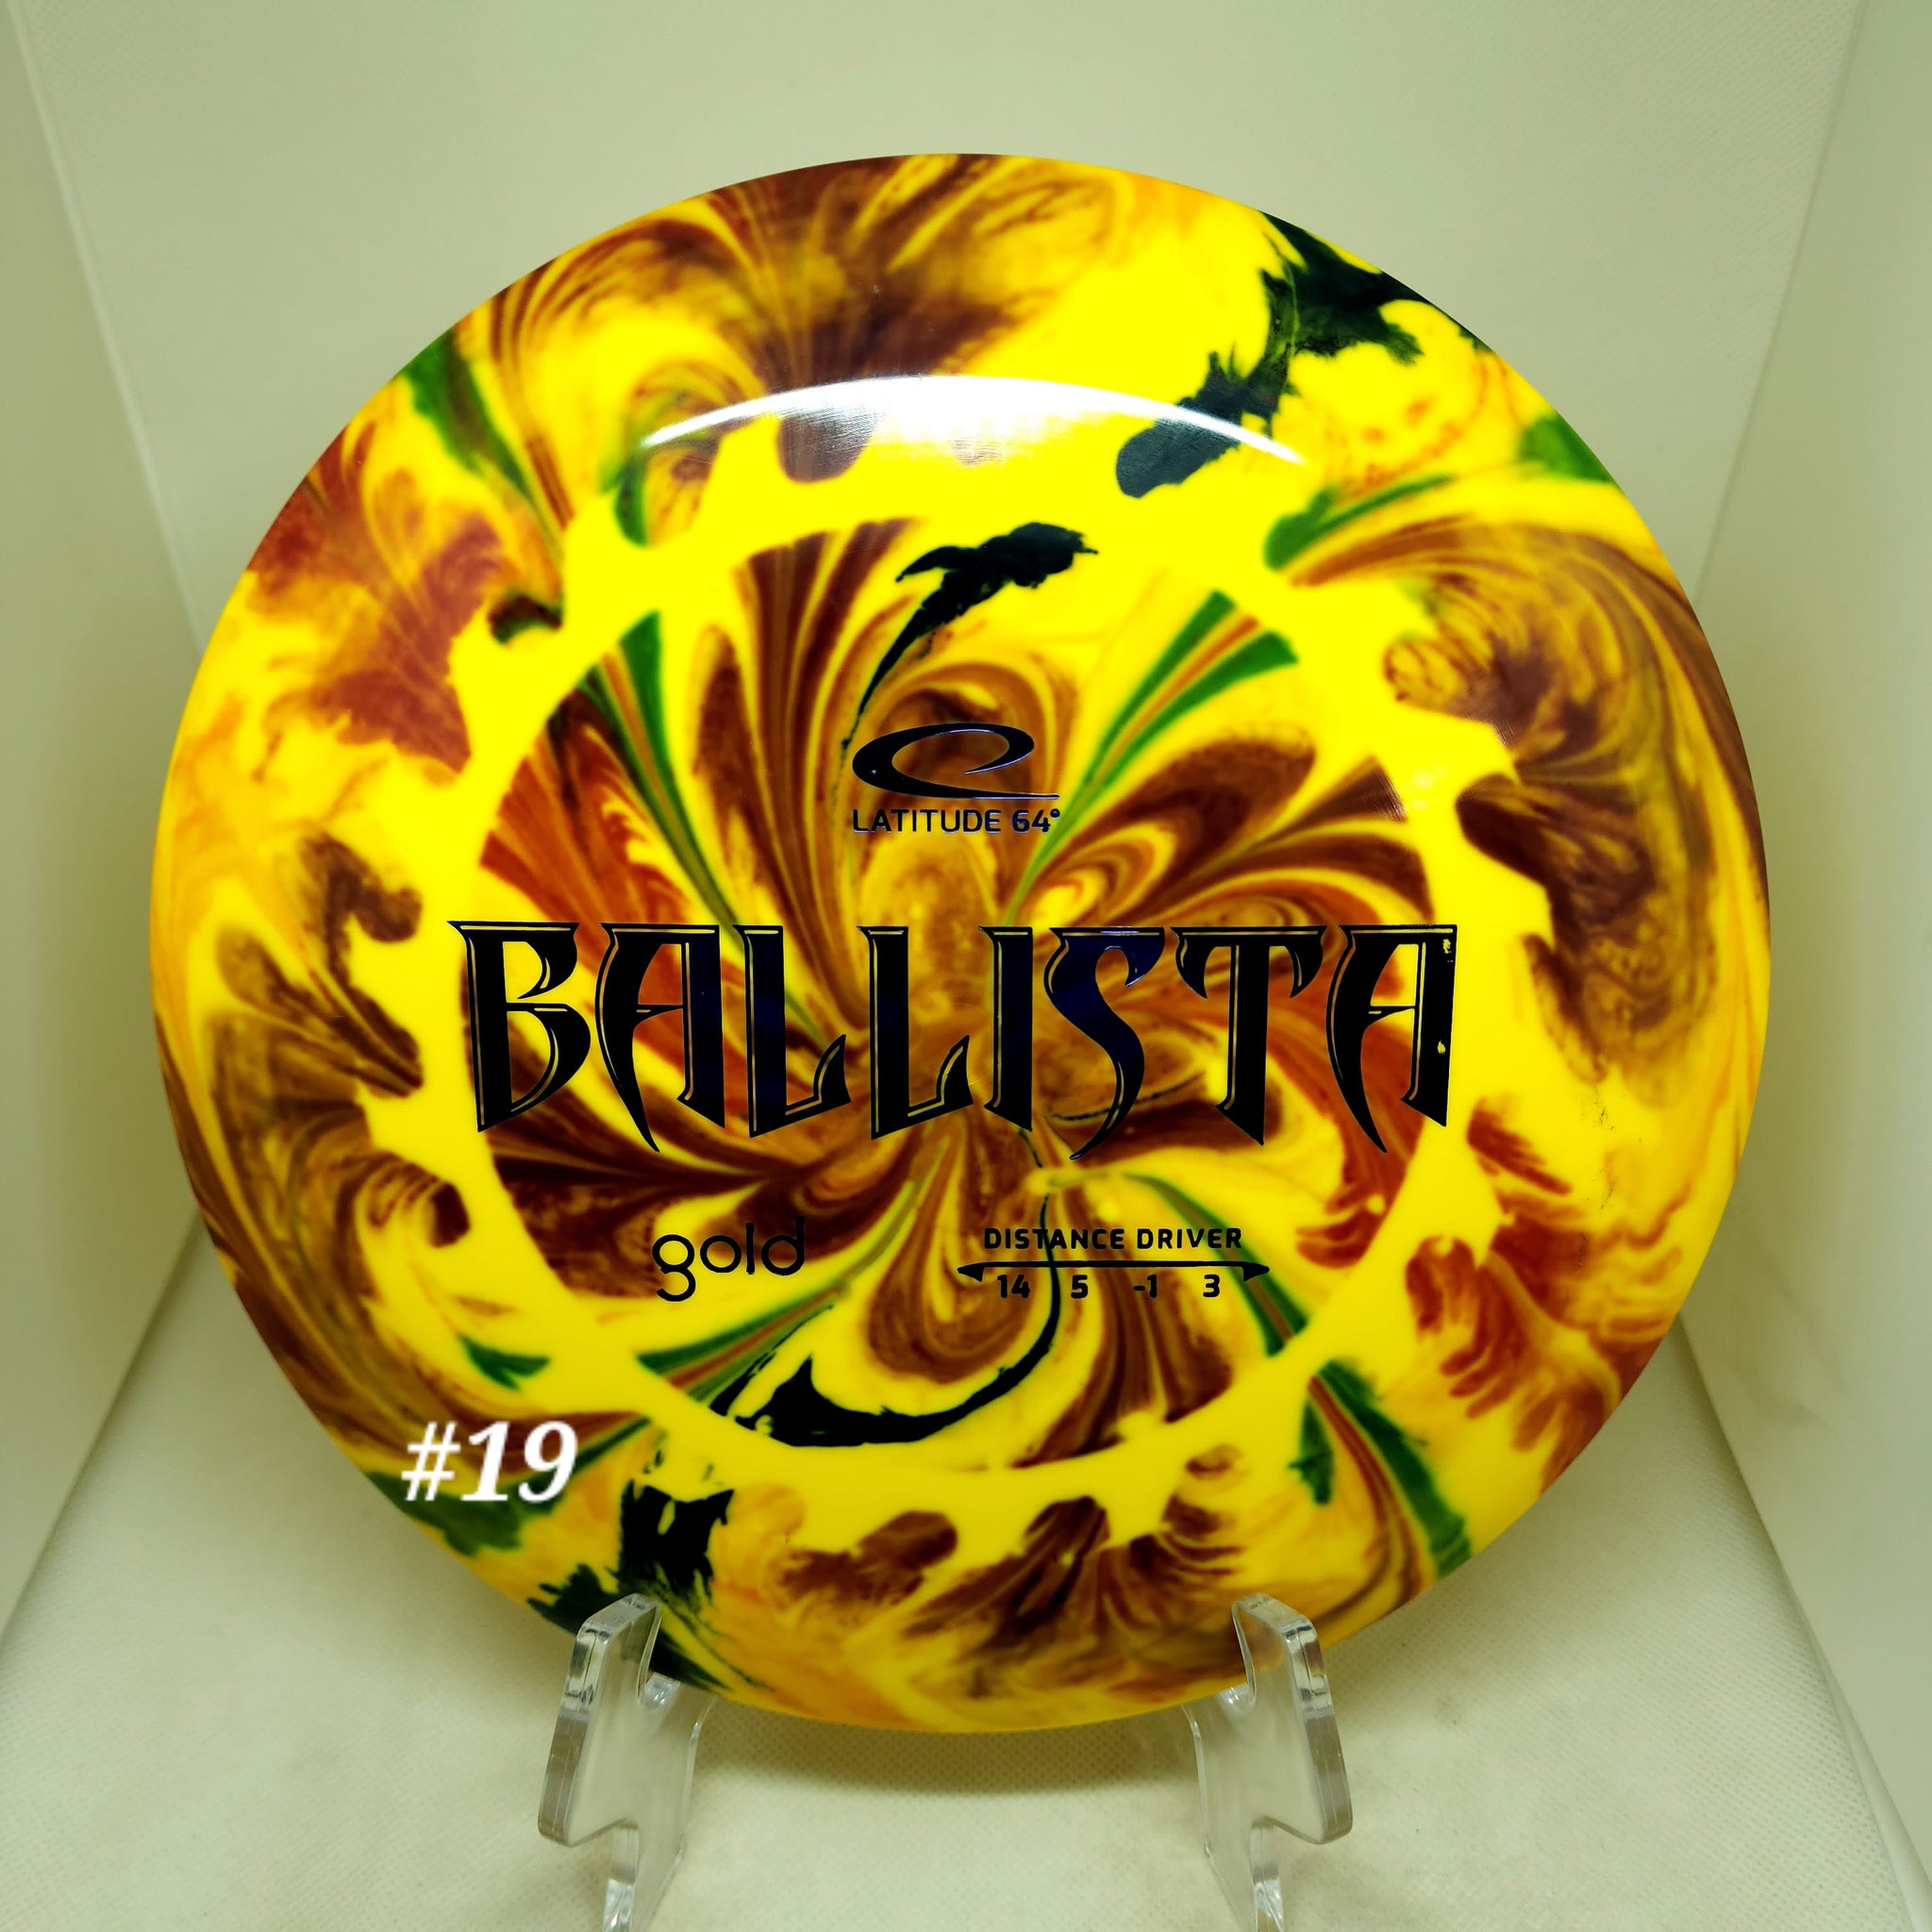 Dyed Discs Gallery (Big Cat Dyes)